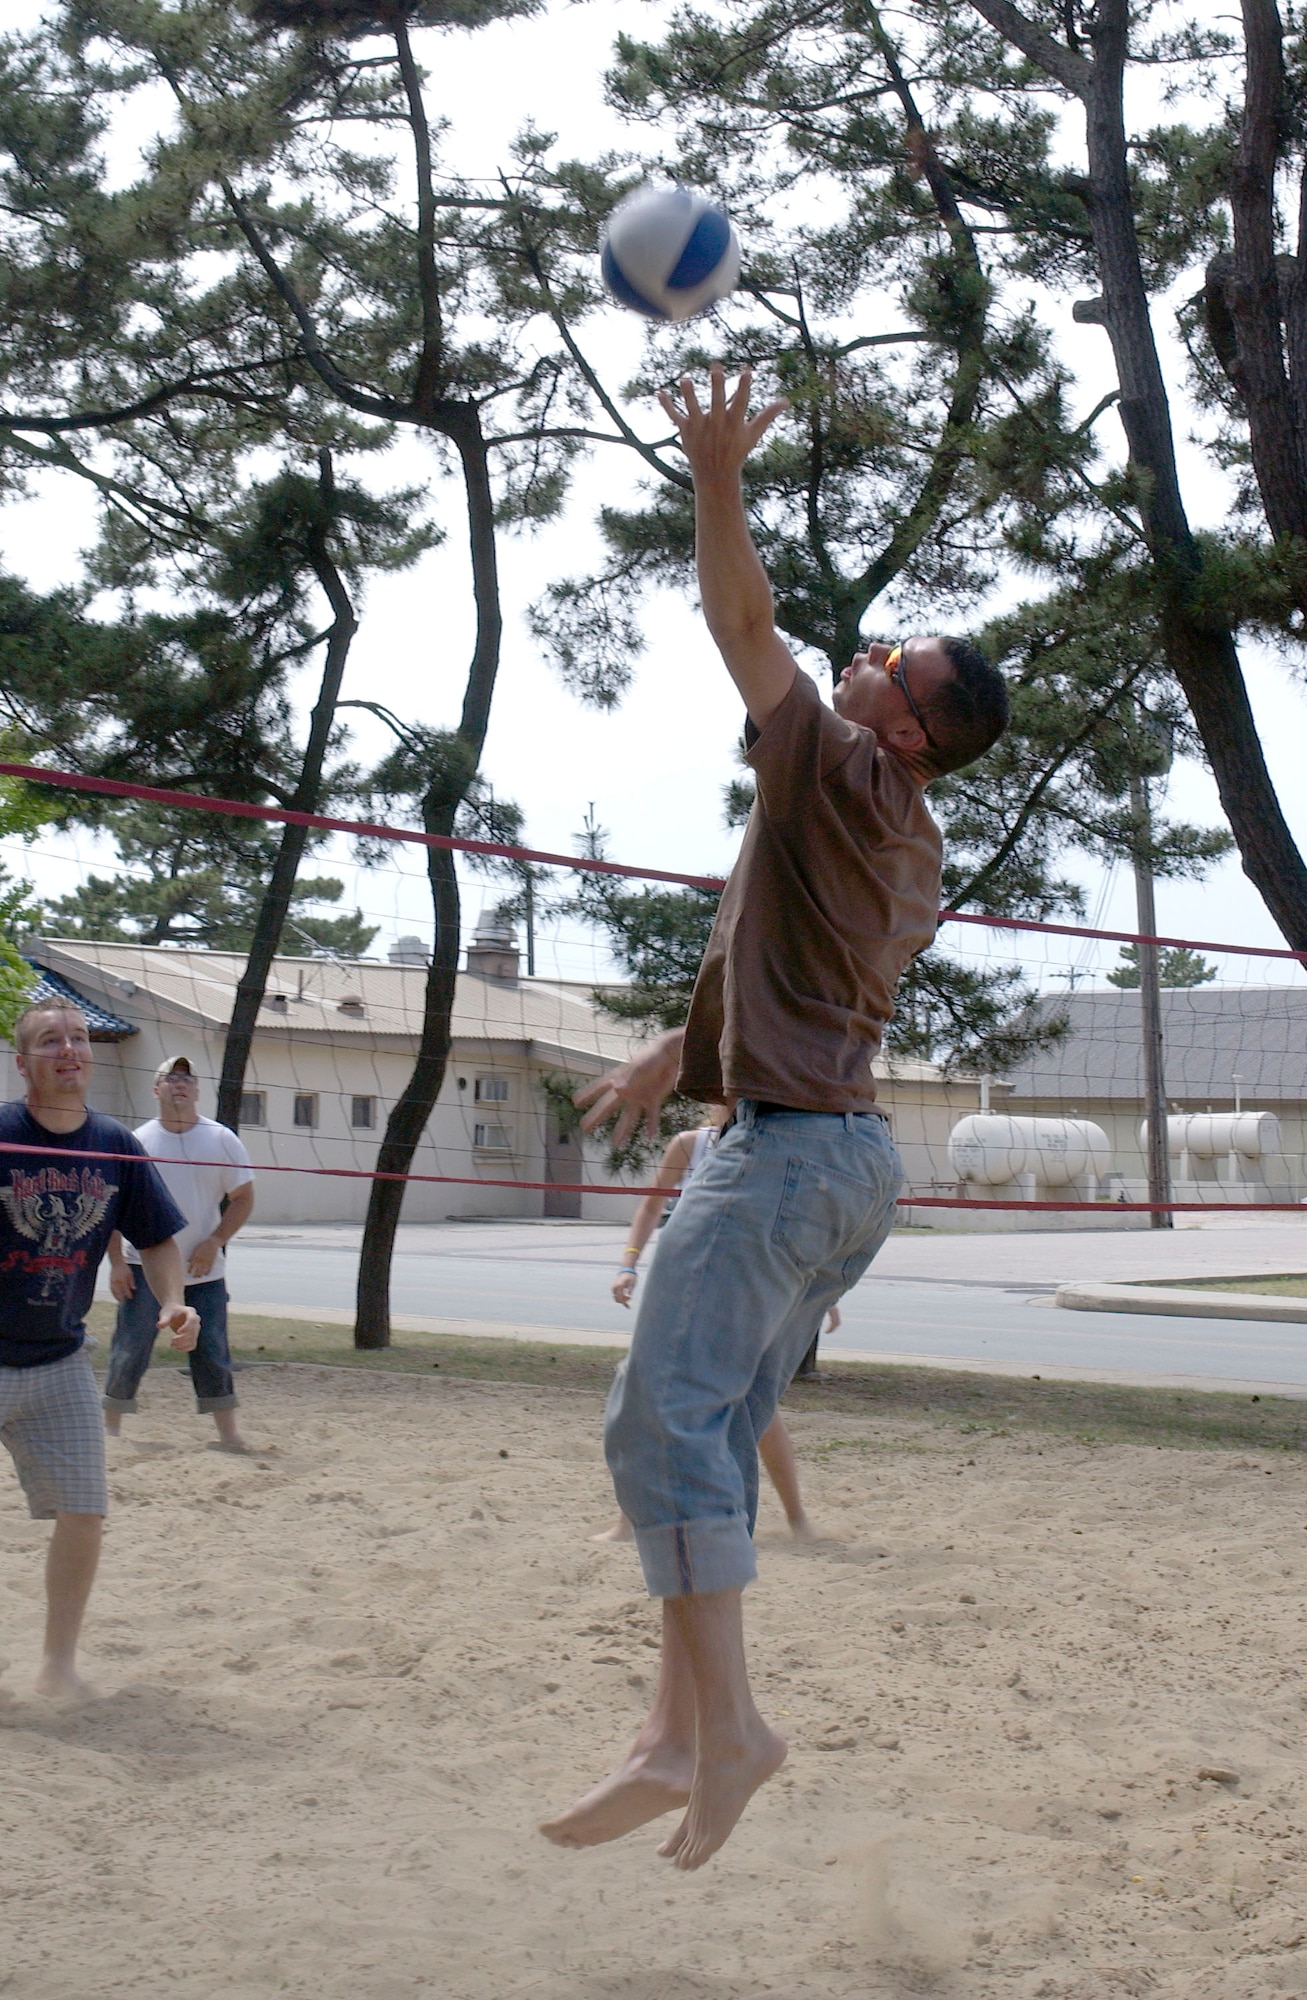 Senior Airman Steven Doty, Airmen Committed to Excellence (ACE) association president, participates in a vollyball game during the ACE barbeque June 17.  The ACE sponsored the event to encourage Airmen to get involoed with the association.  (U.S. Air Force photo/Staff Sgt. Darcie Ibidapo)